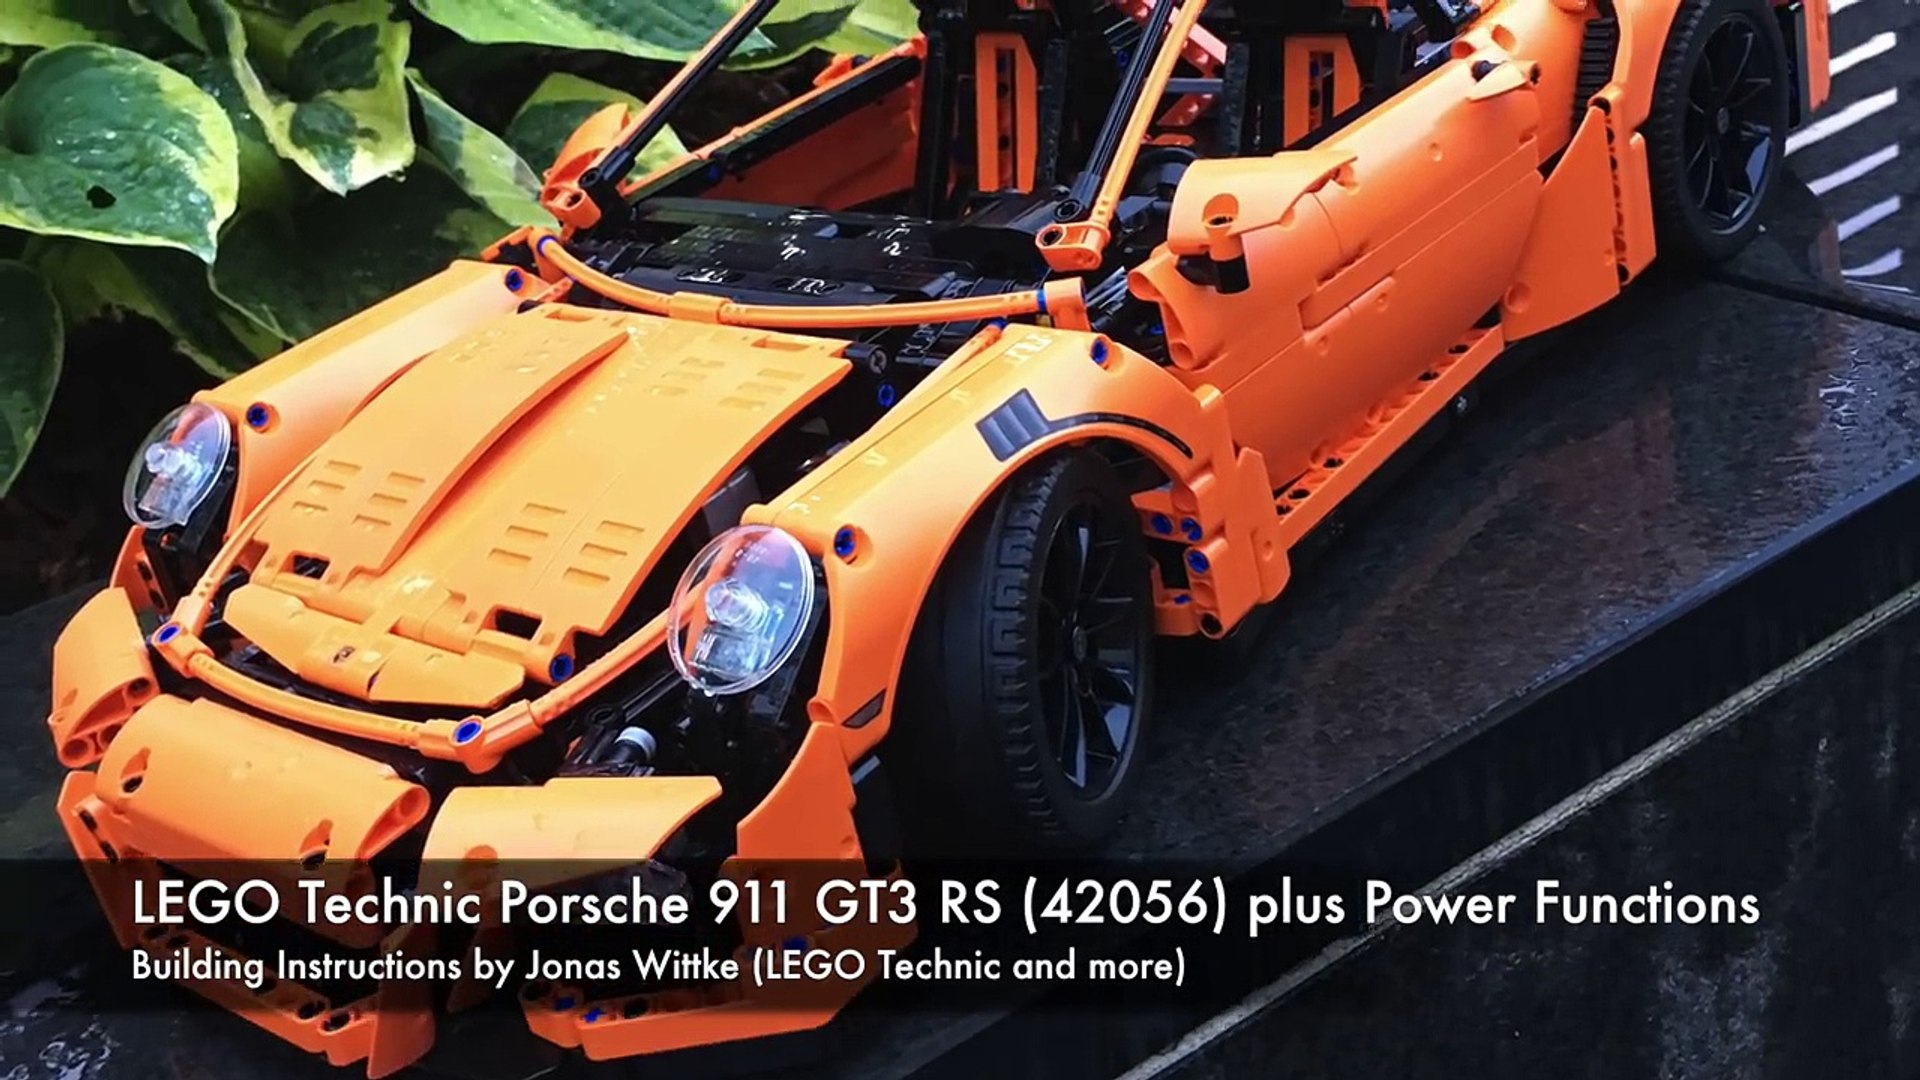 Lego Technic Porsche Gt3 Rs 42056 With Power Functions Remote Control